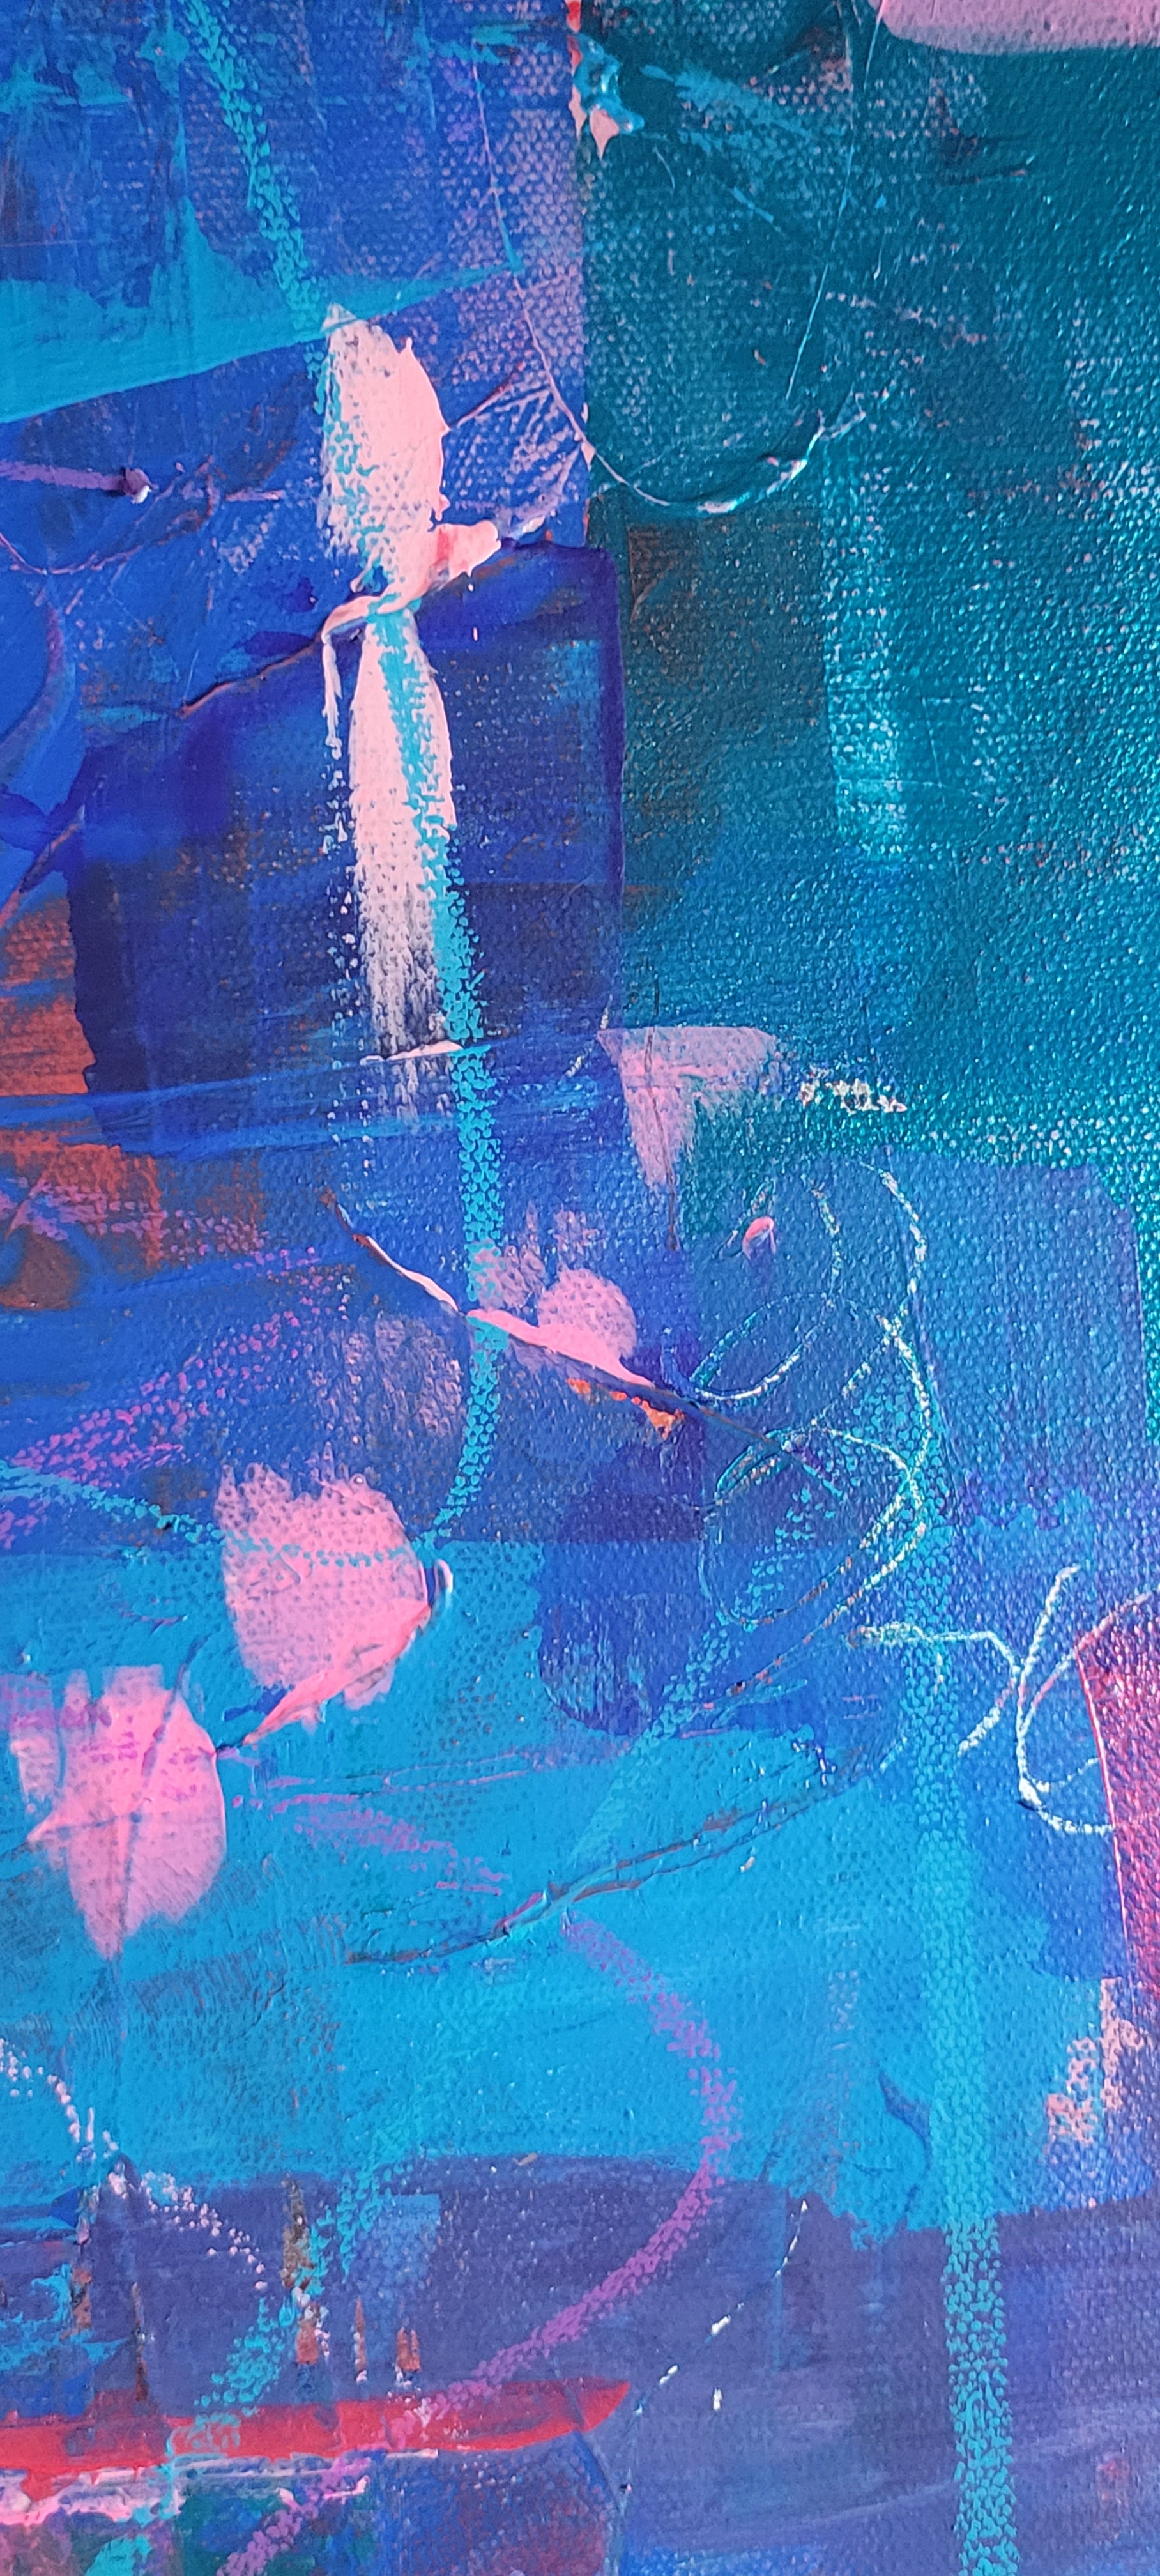 Detail shows vibrant blues with marks in shades of pink and magenta.